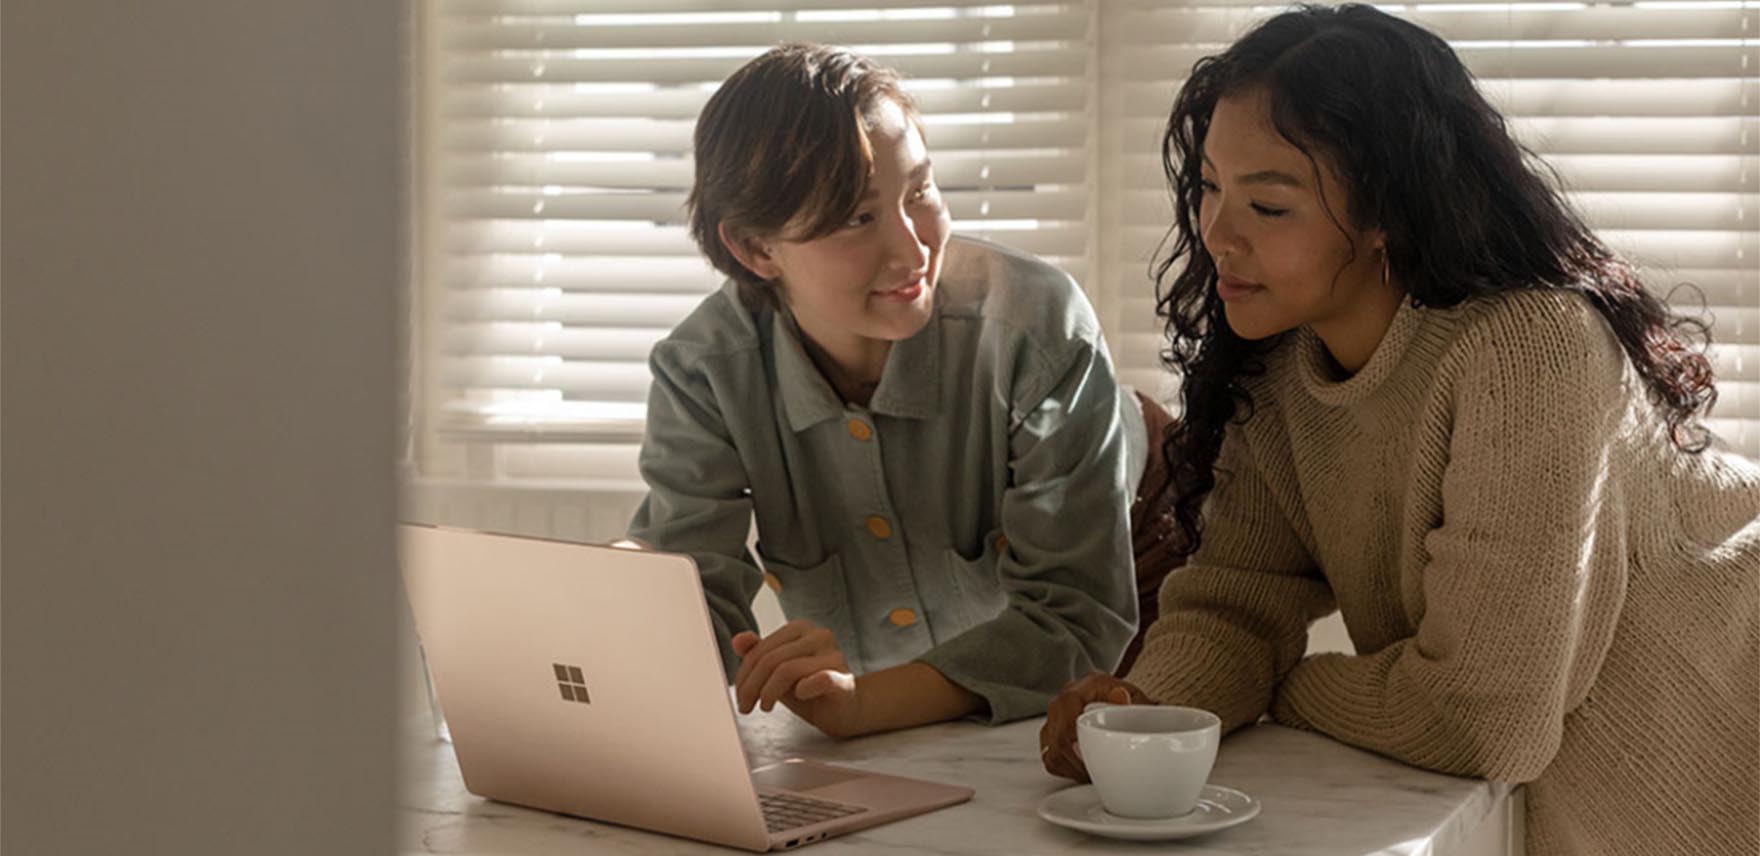 Two people working on a Surface laptop